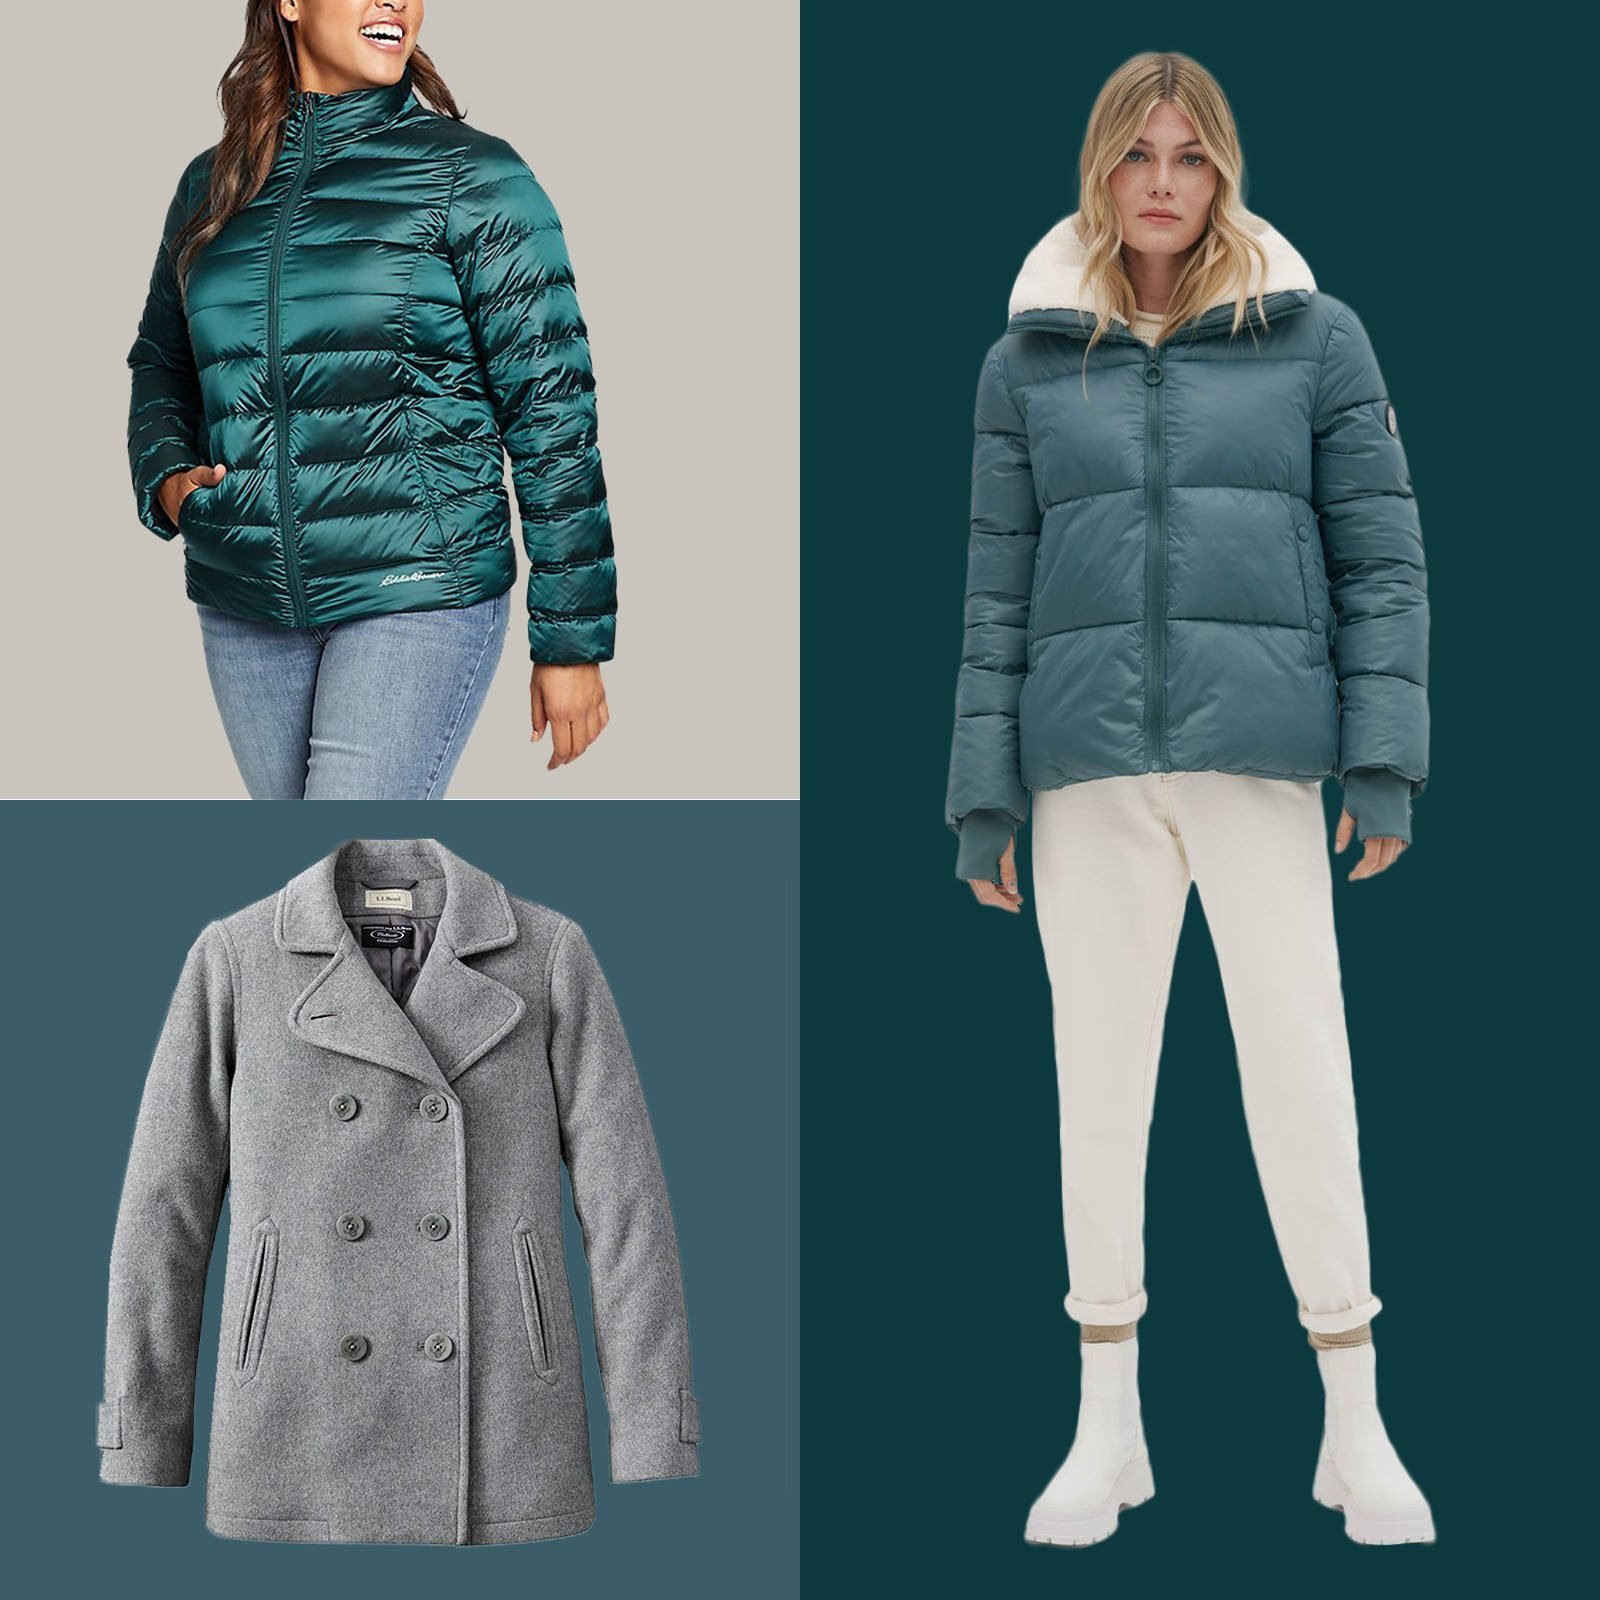 25 Best Women's Winter Coats to Stay Warm and Stylish